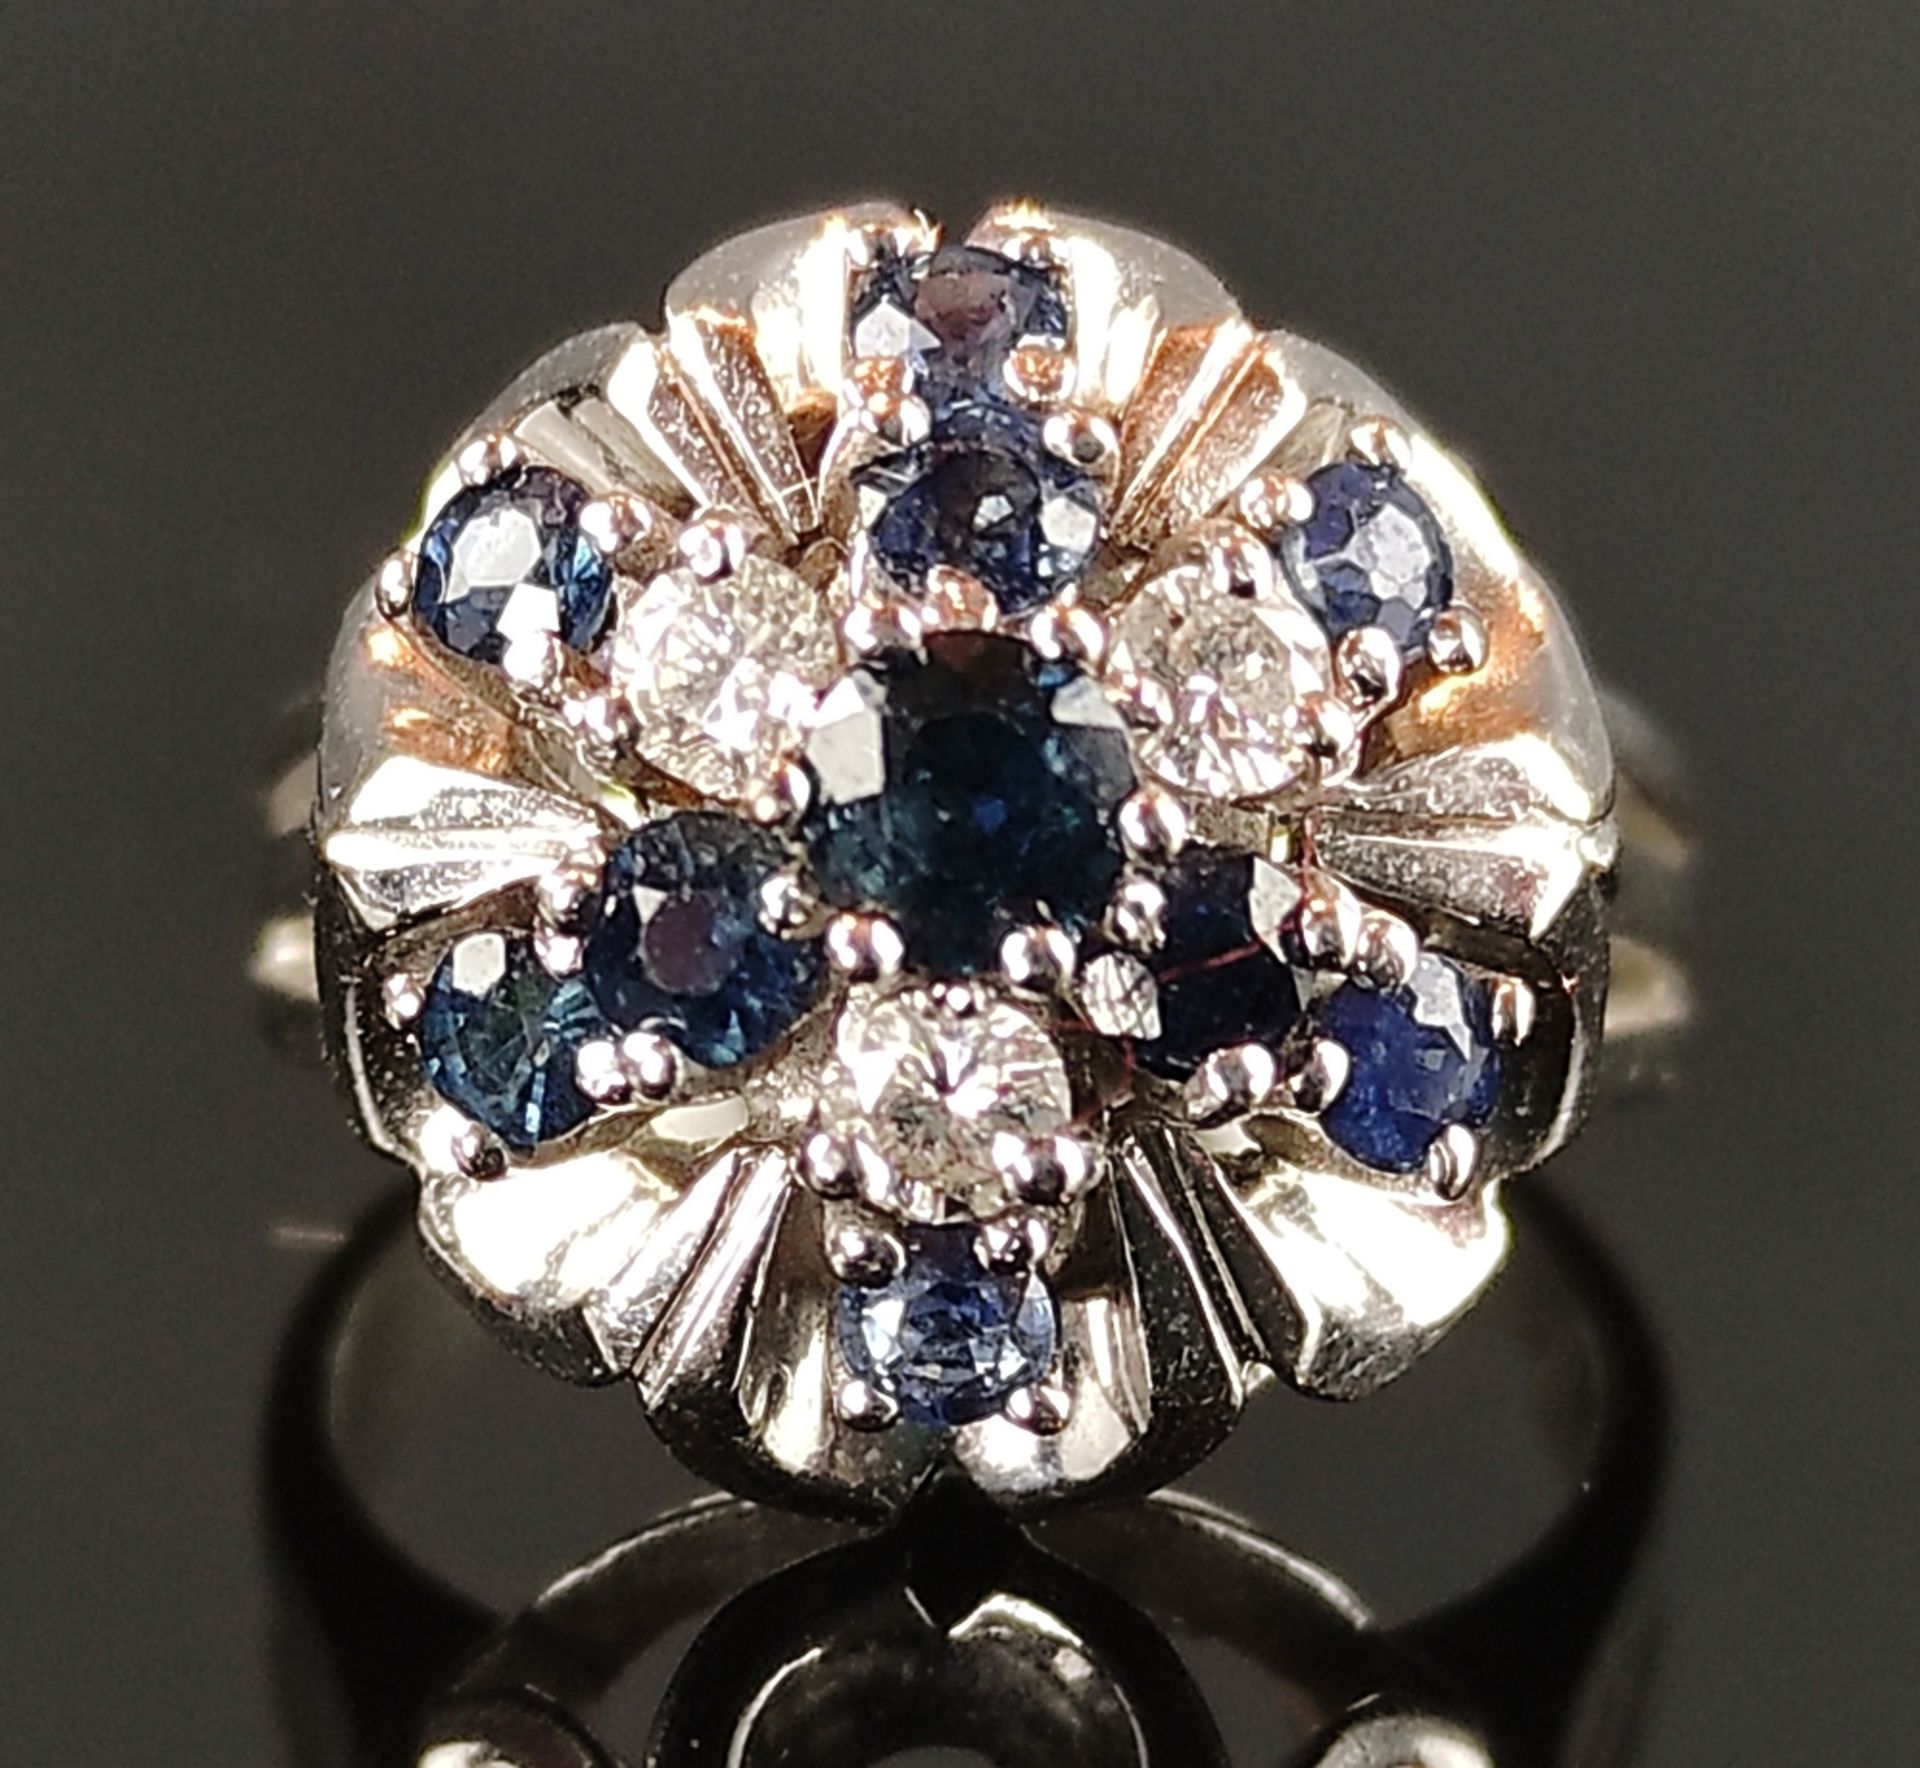 Diamond-sapphire-ring, with 10 sapphires and 3 diamonds, 585/14K white gold, 6.3g, size 48.5 - Image 3 of 6